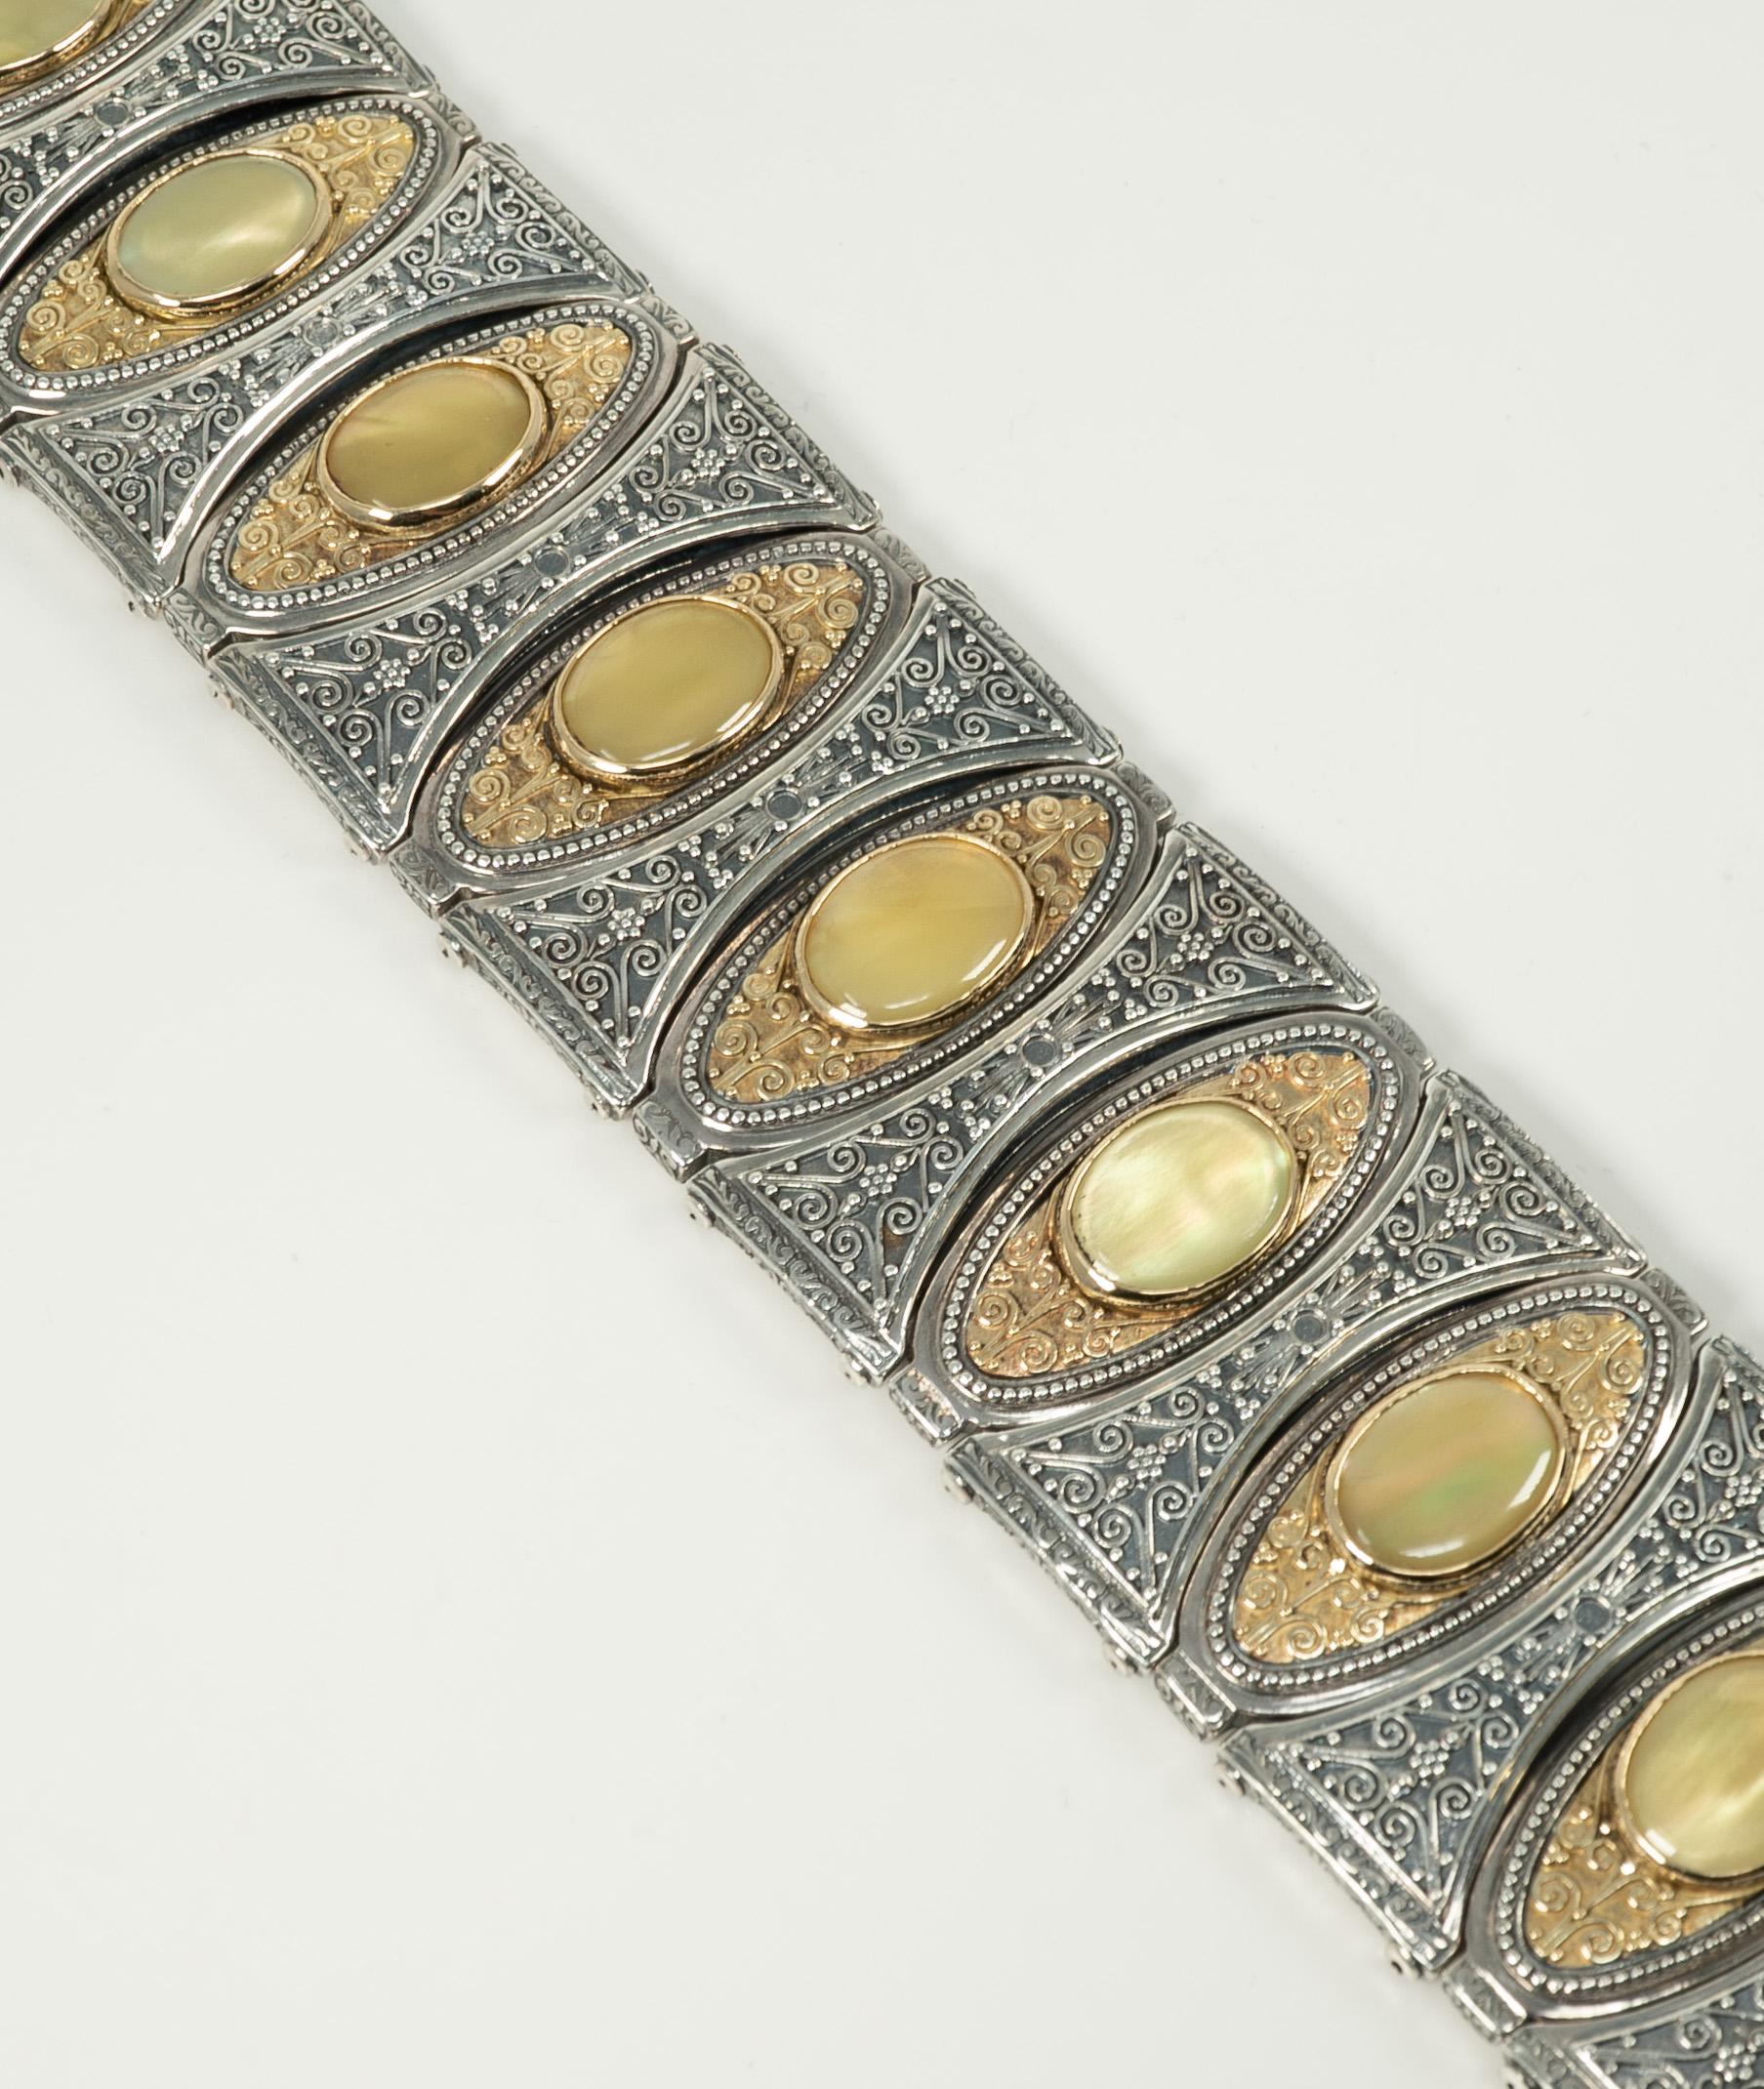 This stunning Konstantino bracelet is in 18 karat yellow gold and sterling silver and features oval-shaped inlays of dyed mother of pearl shell. 